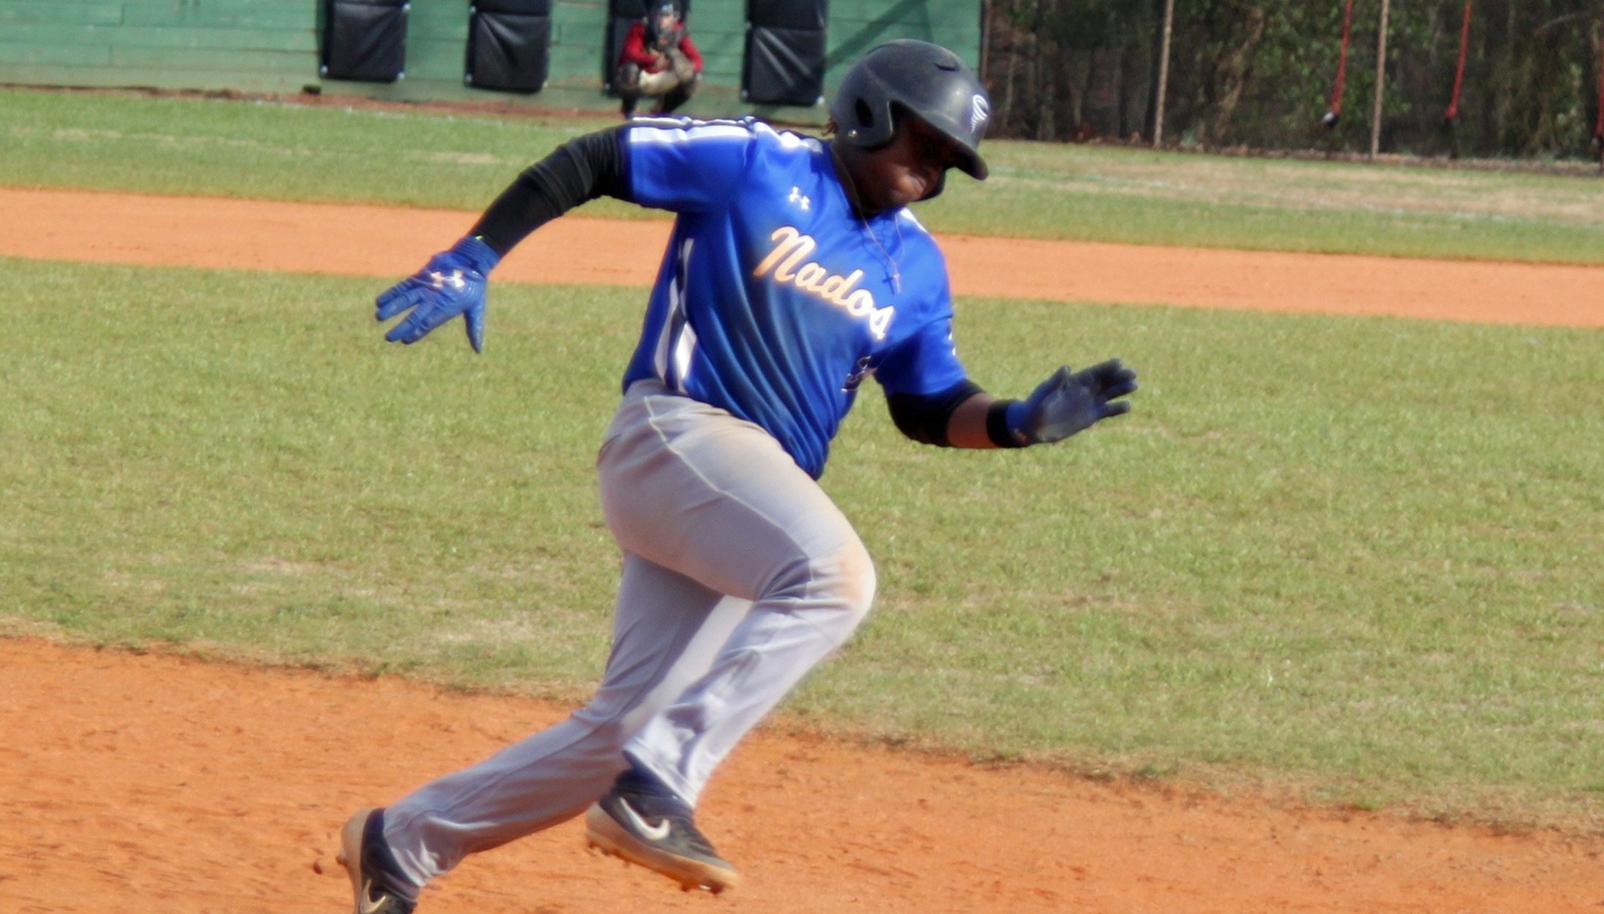 Daiquon Davenport launched his first home run as a Tornado in Friday's home-opener against Piedmont (Photo courtesy of Judy Victory).